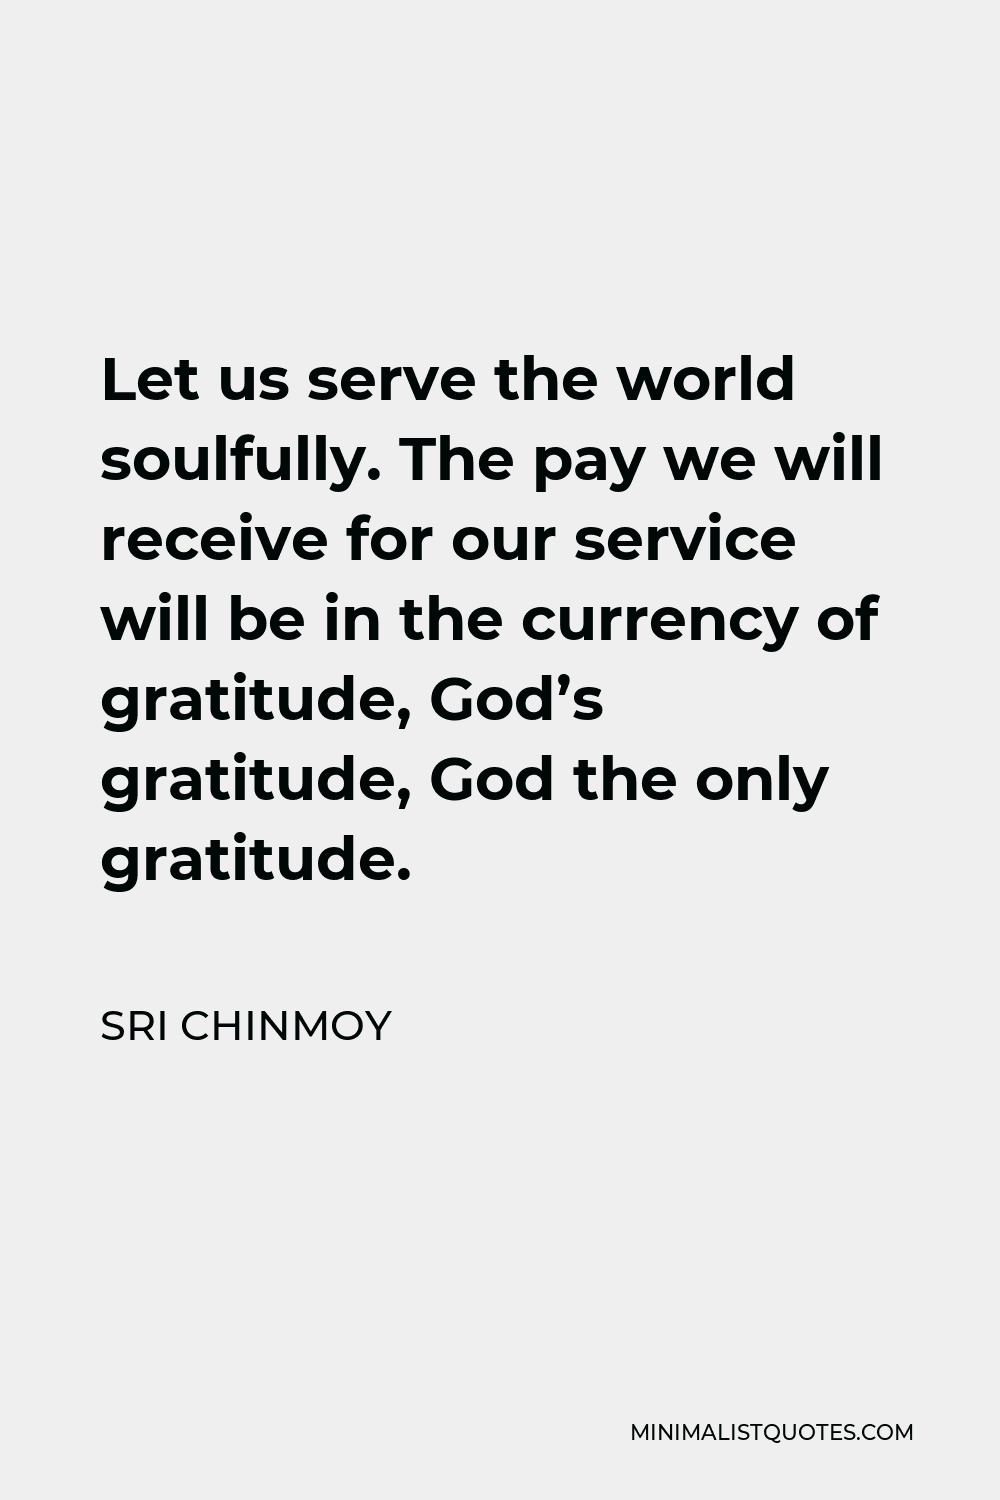 Sri Chinmoy Quote - Let us serve the world soulfully. The pay we will receive for our service will be in the currency of gratitude, God’s gratitude, God the only gratitude.